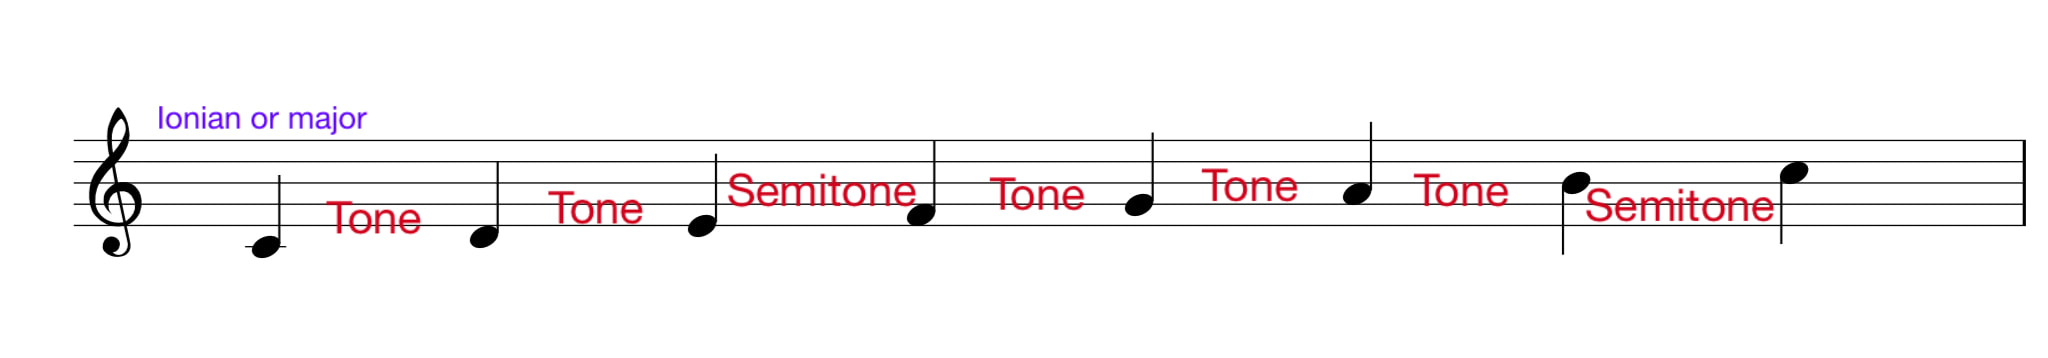 Ionian or major scale